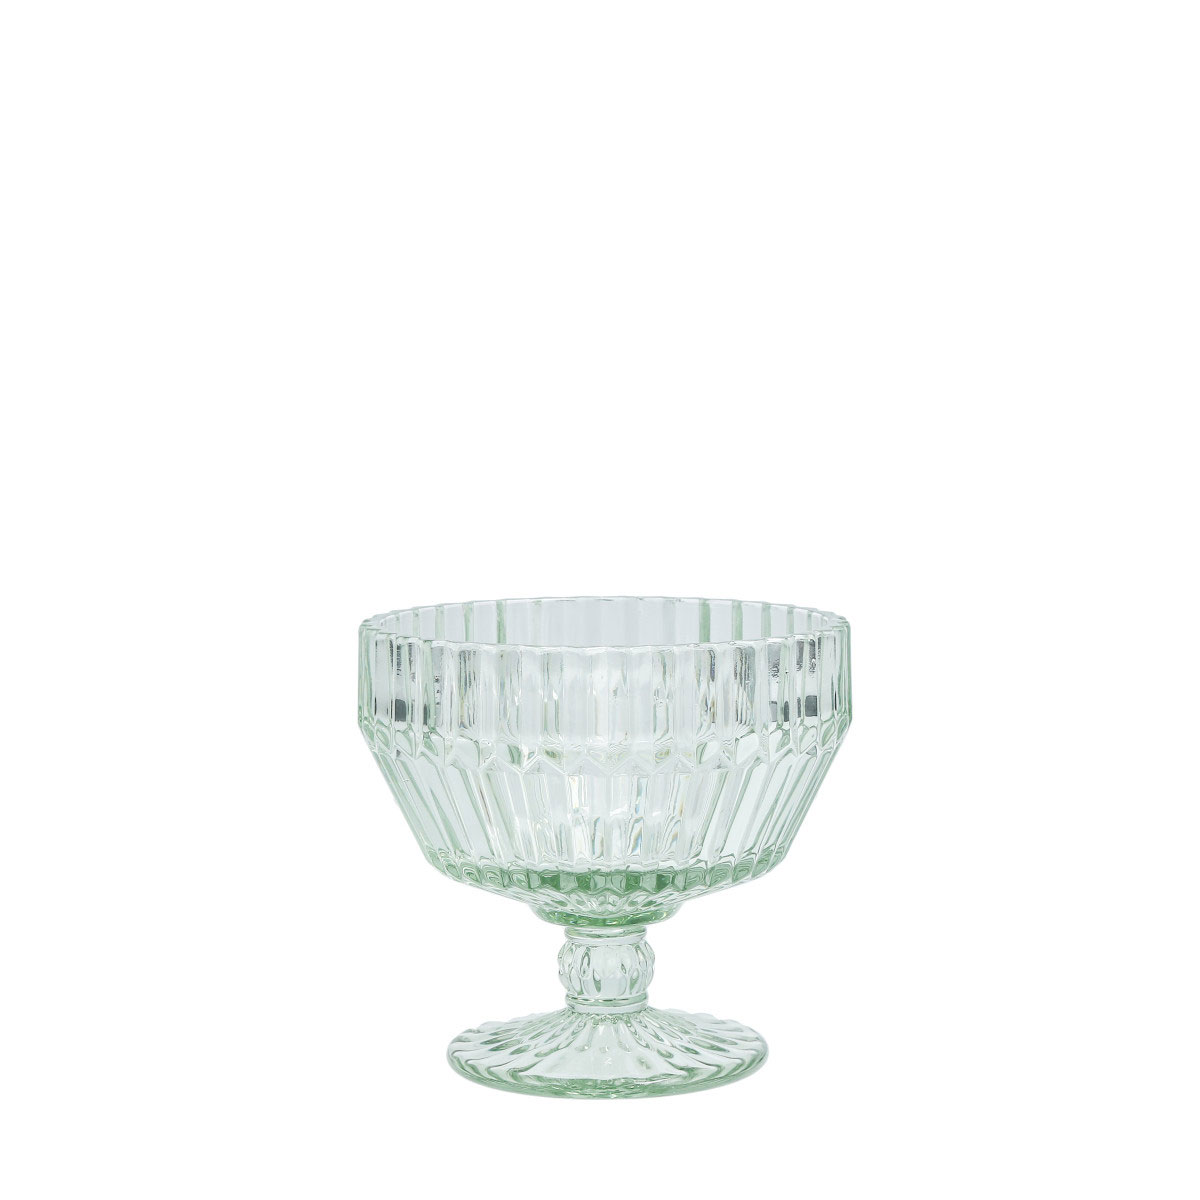 Fortessa Glass Archie Sage Green Coupe, Footed Dessert Bowl 10oz